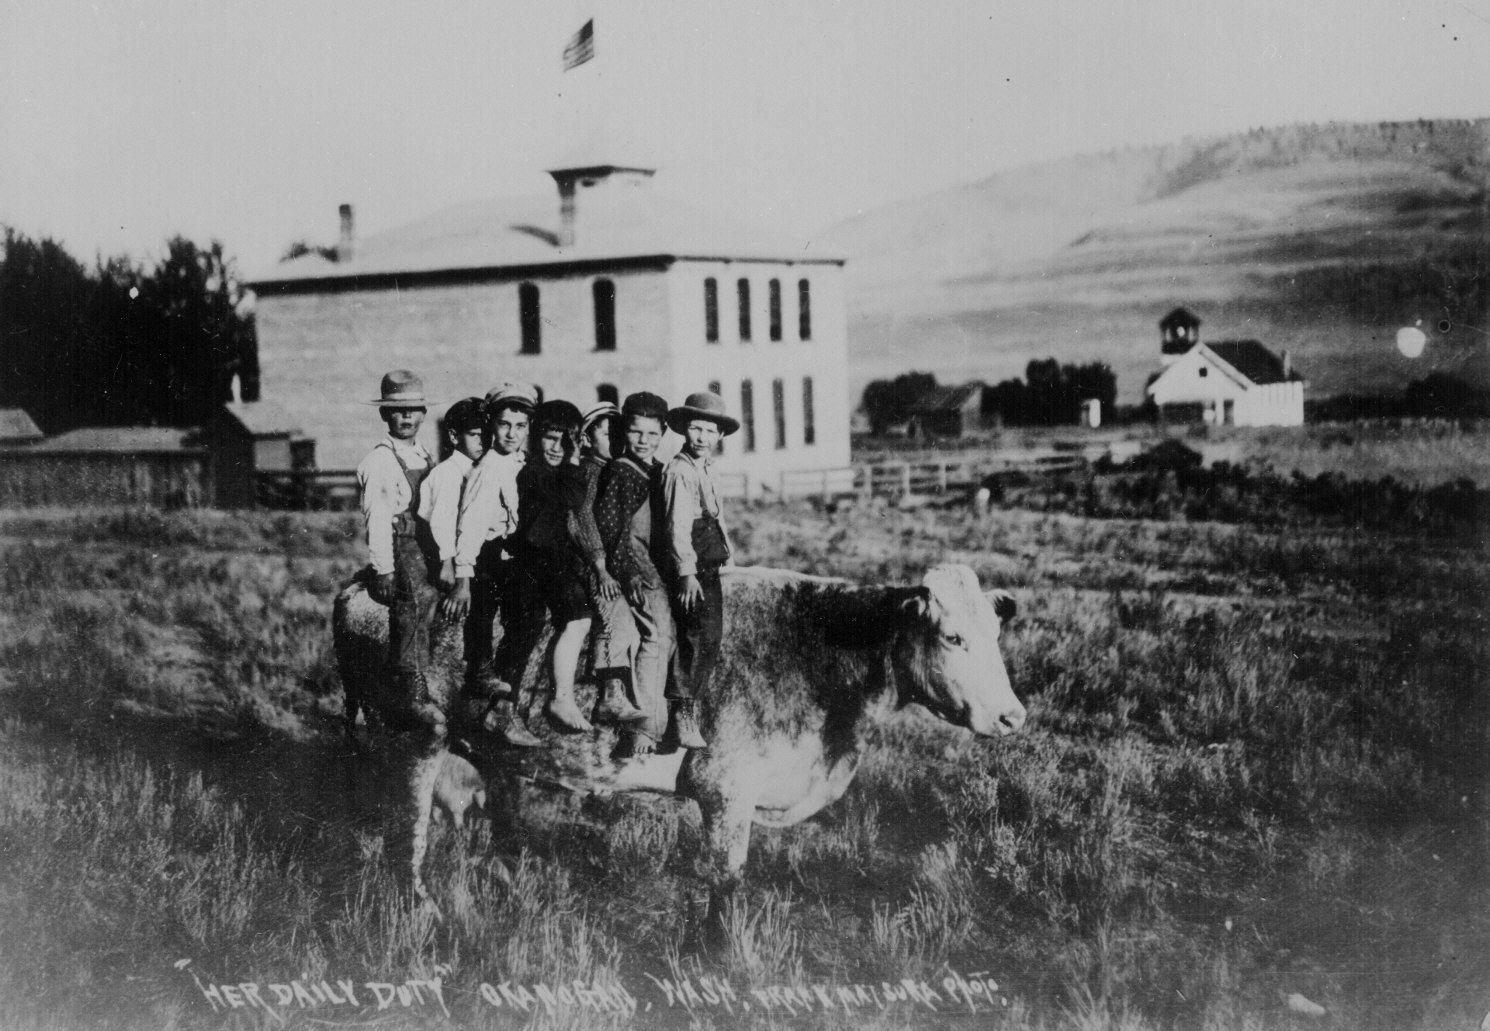 Living In The Old West Photographs From The Birth Of The United States image 1